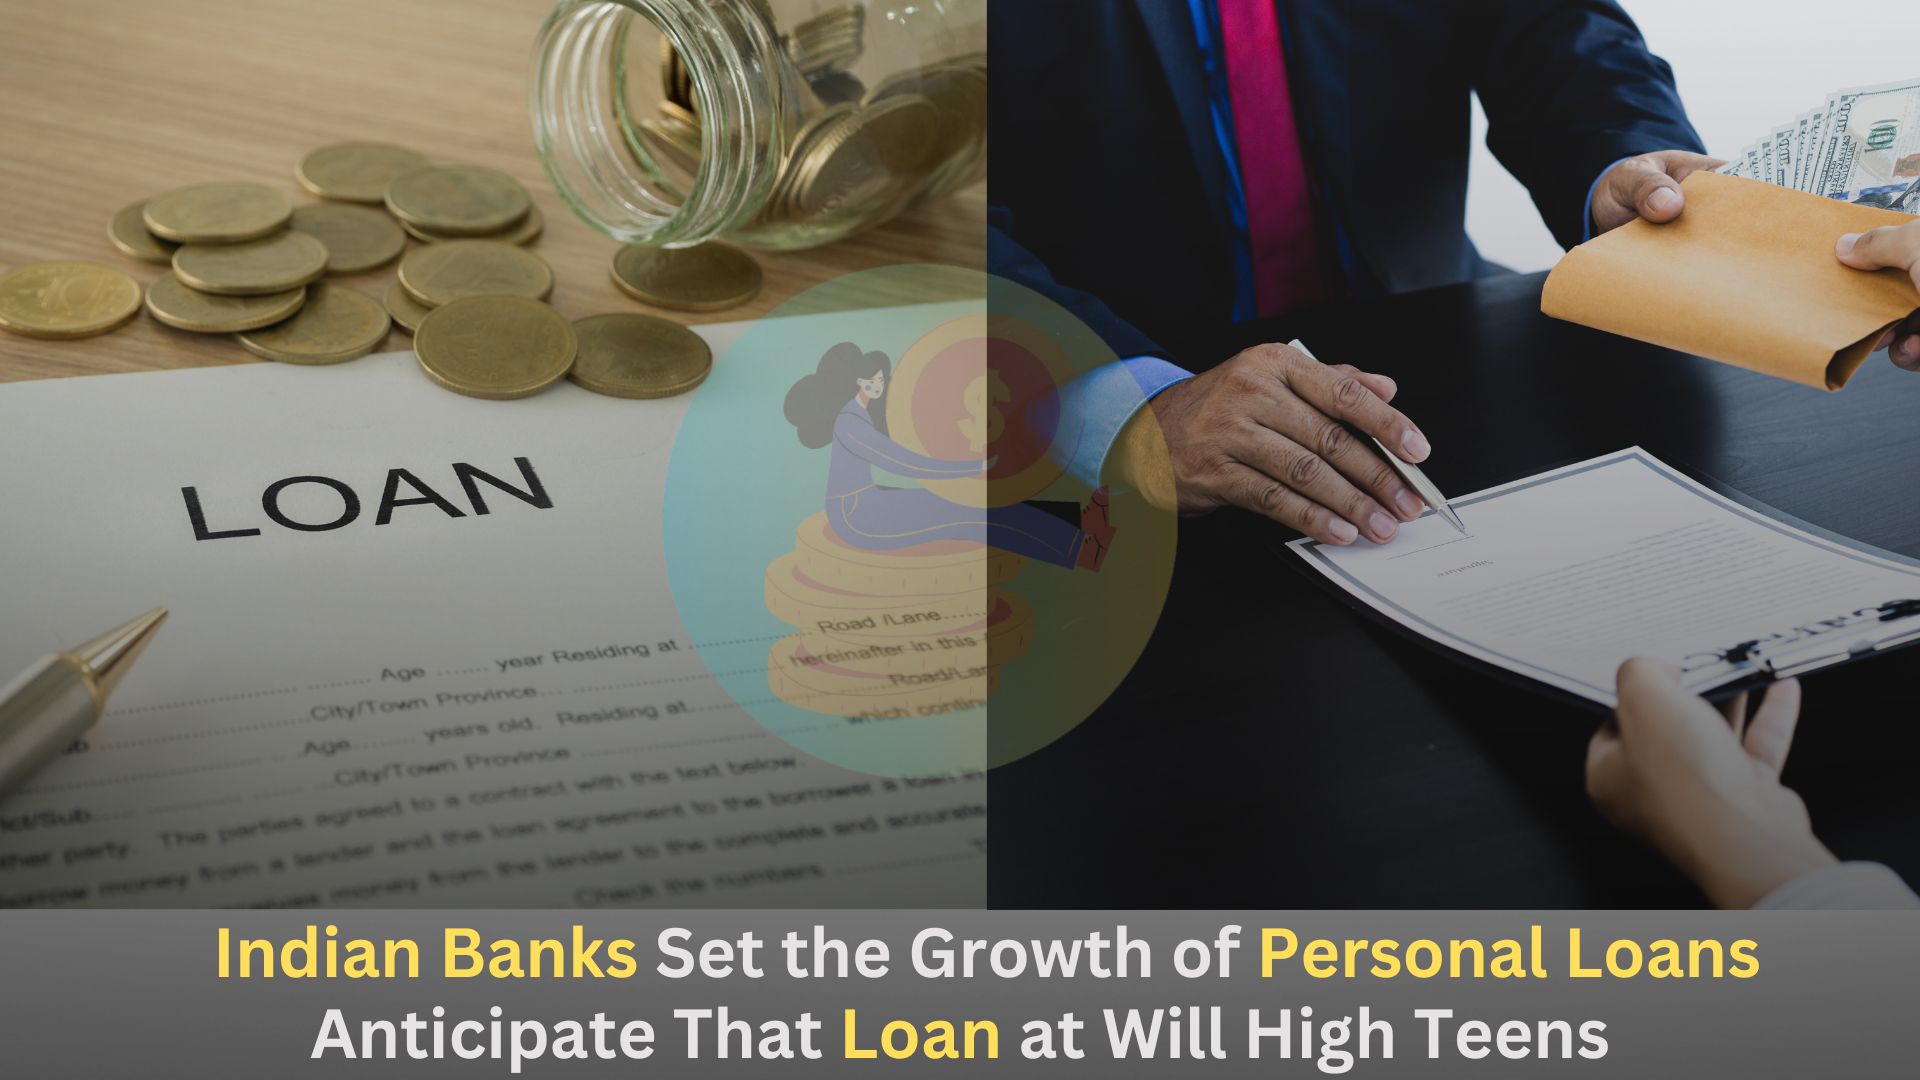 Indian Banks Set the Growth of Personal Loans,Anticipate That Loan at Will High Teens